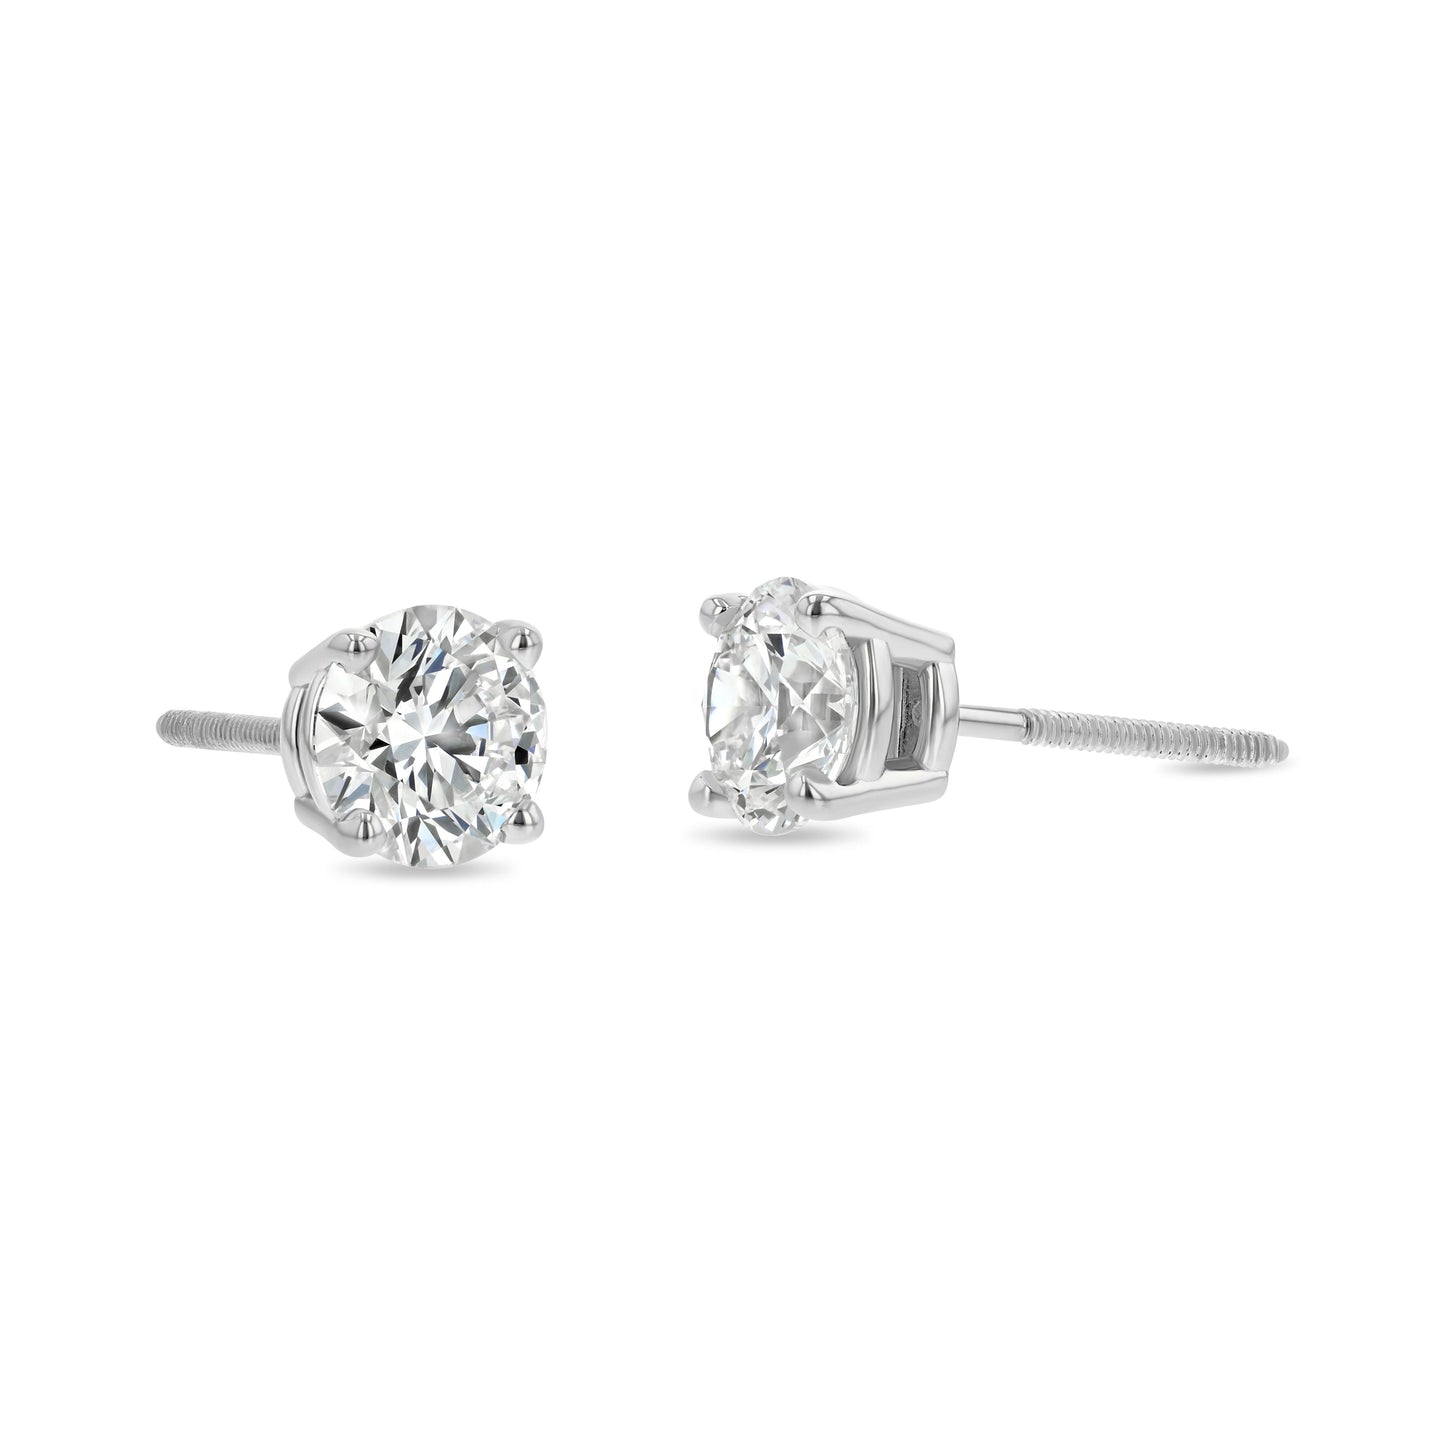 14k White Gold 4-prong Round Diamond Stud Earrings 1/2ctw (4.0mm Ea), M-n Color, Si2-si3 Clarity